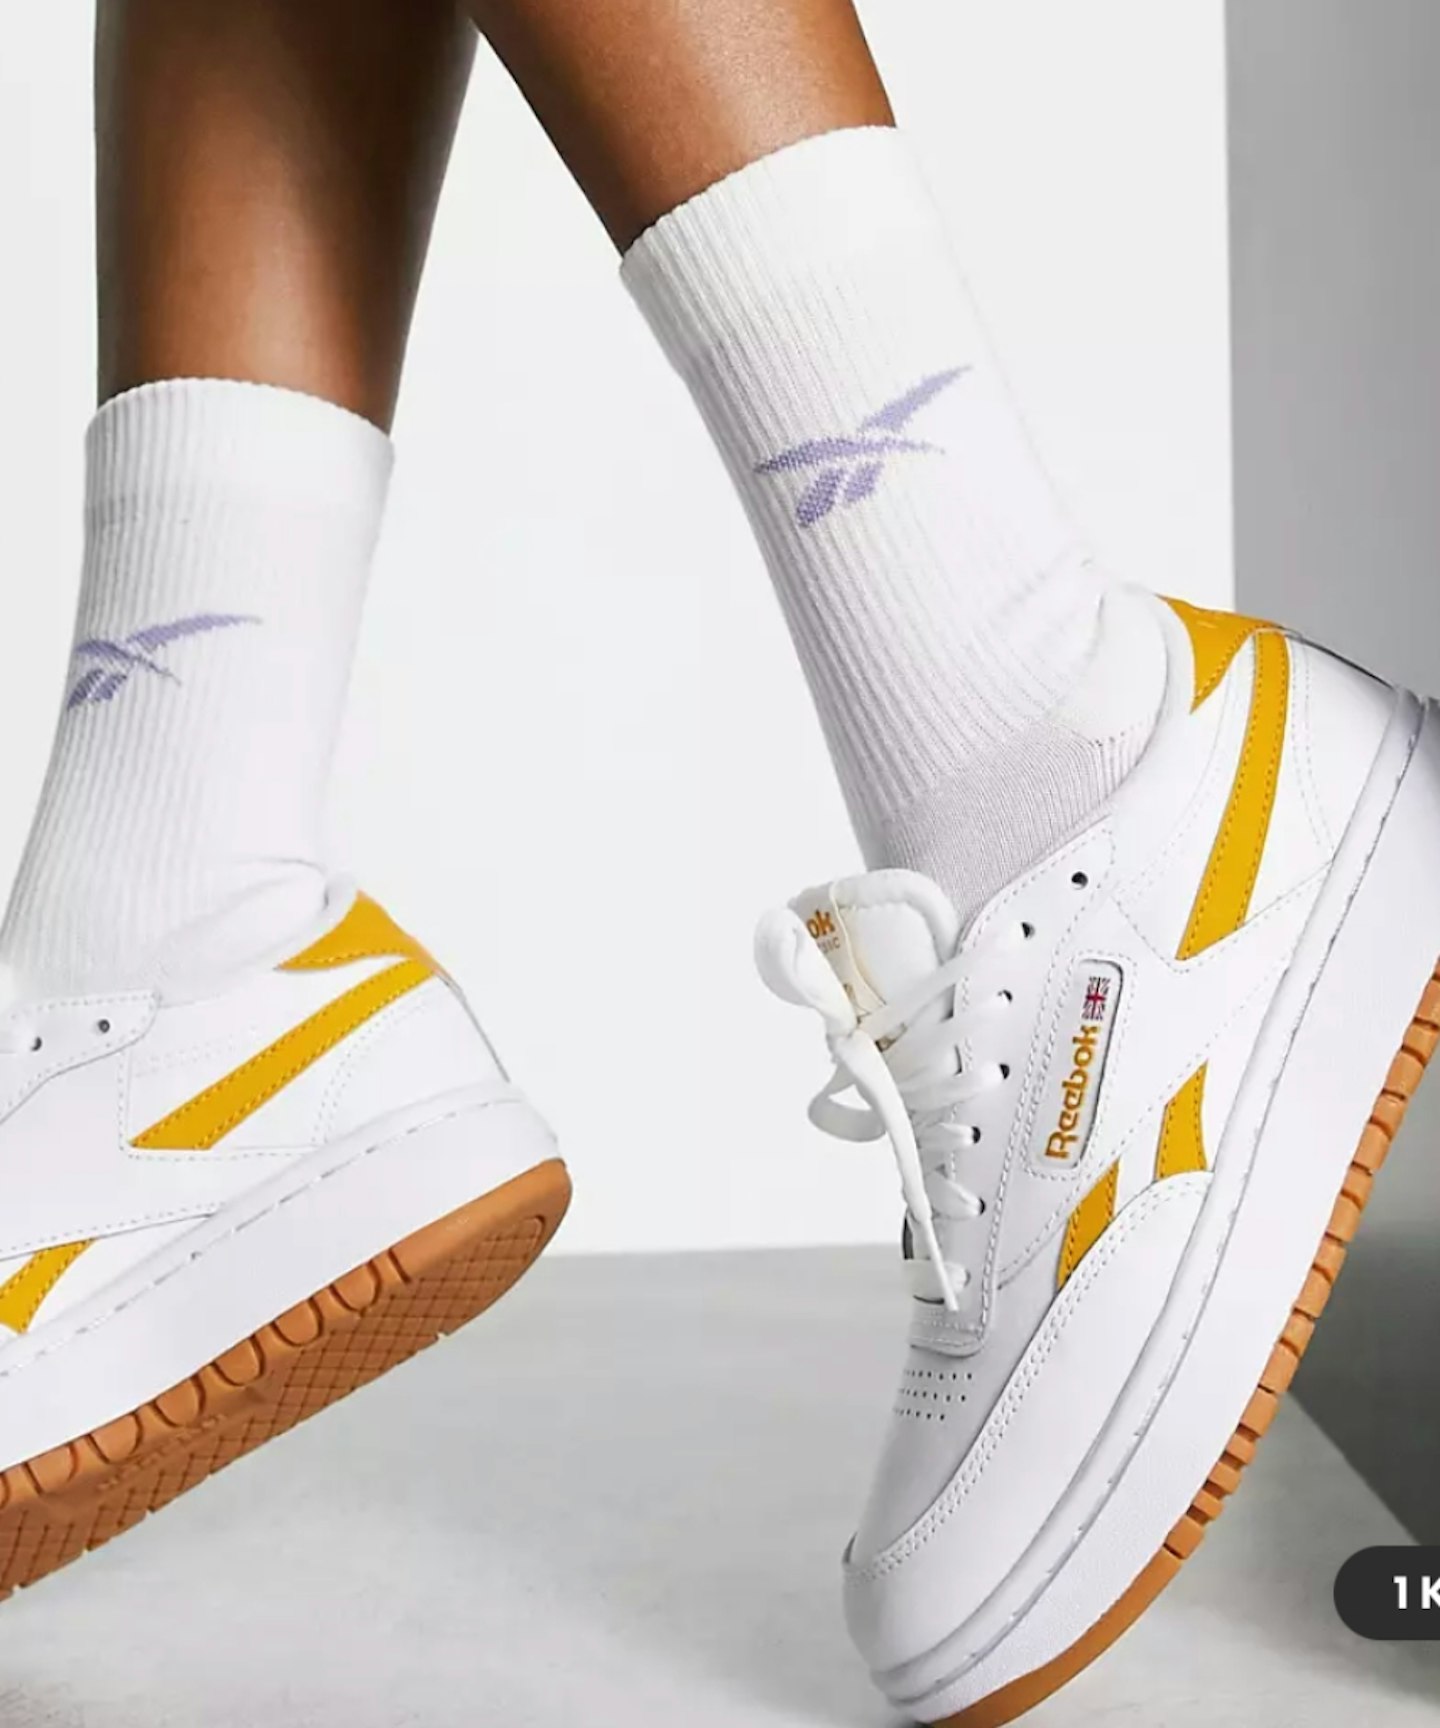 Reebok Club C Double Trainers in White and Orange